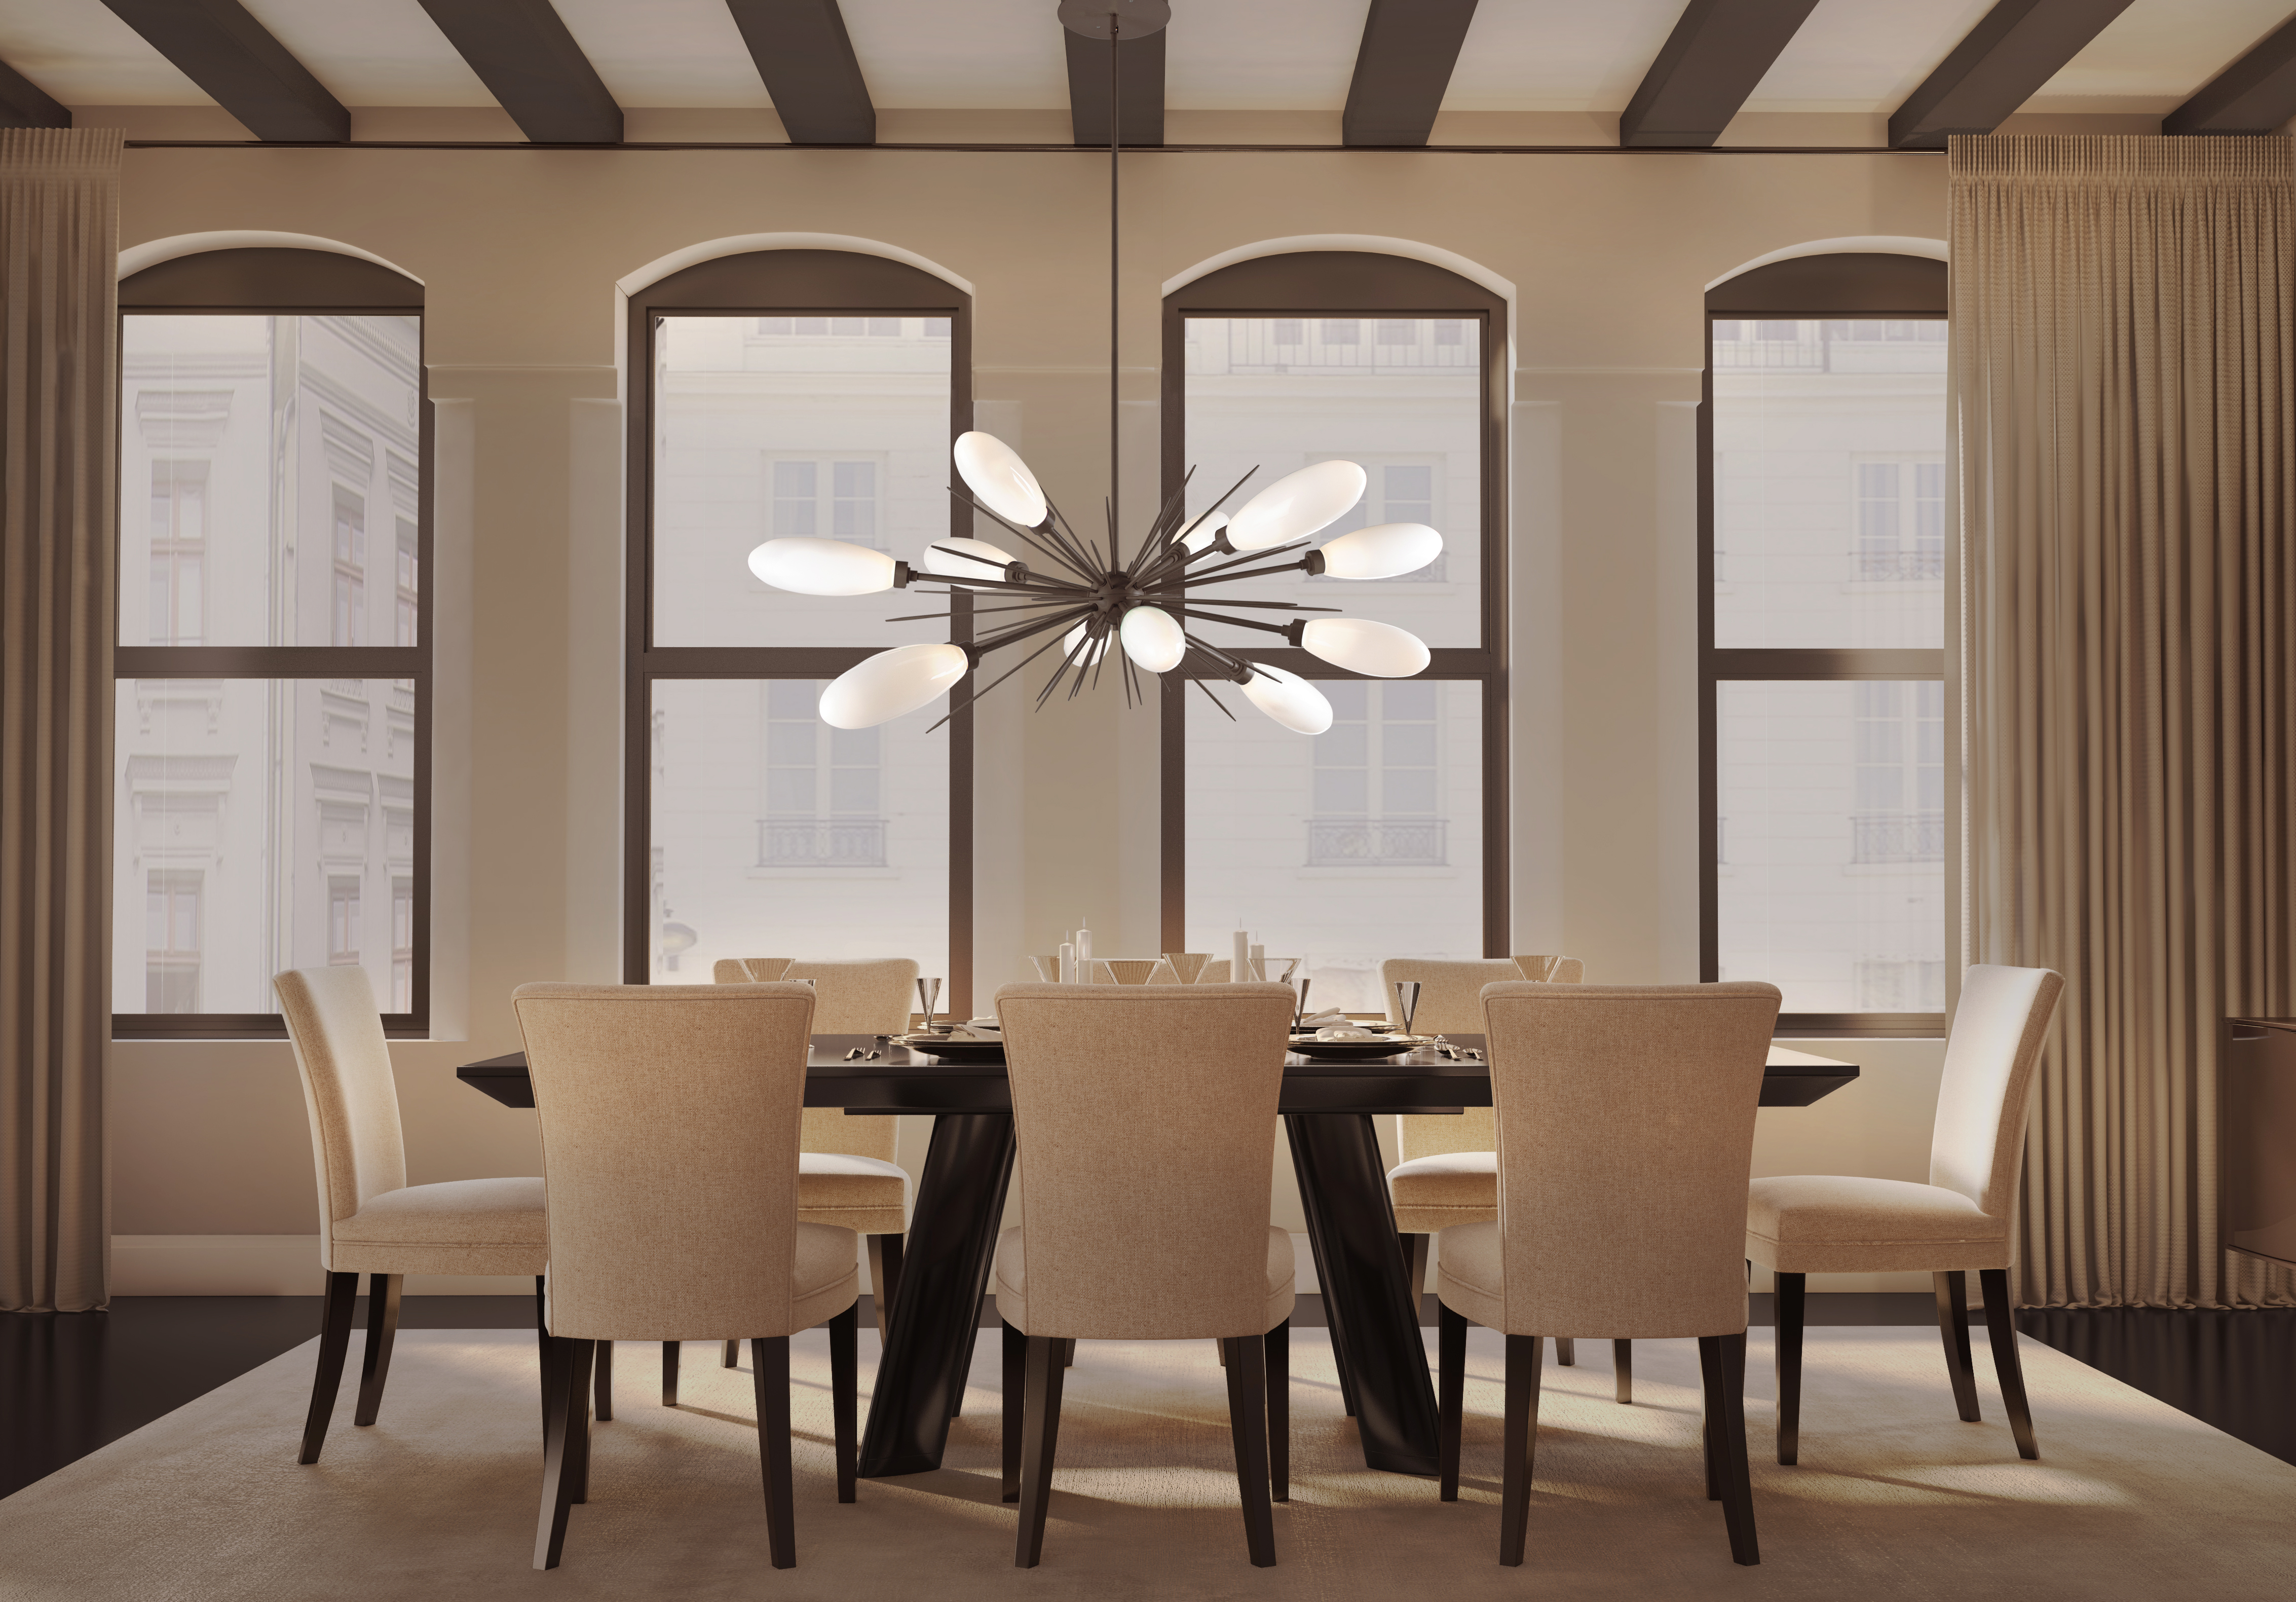 A Hammerton Studio Fiori oval chandelier hangs perfectly over a beautiful dining room table